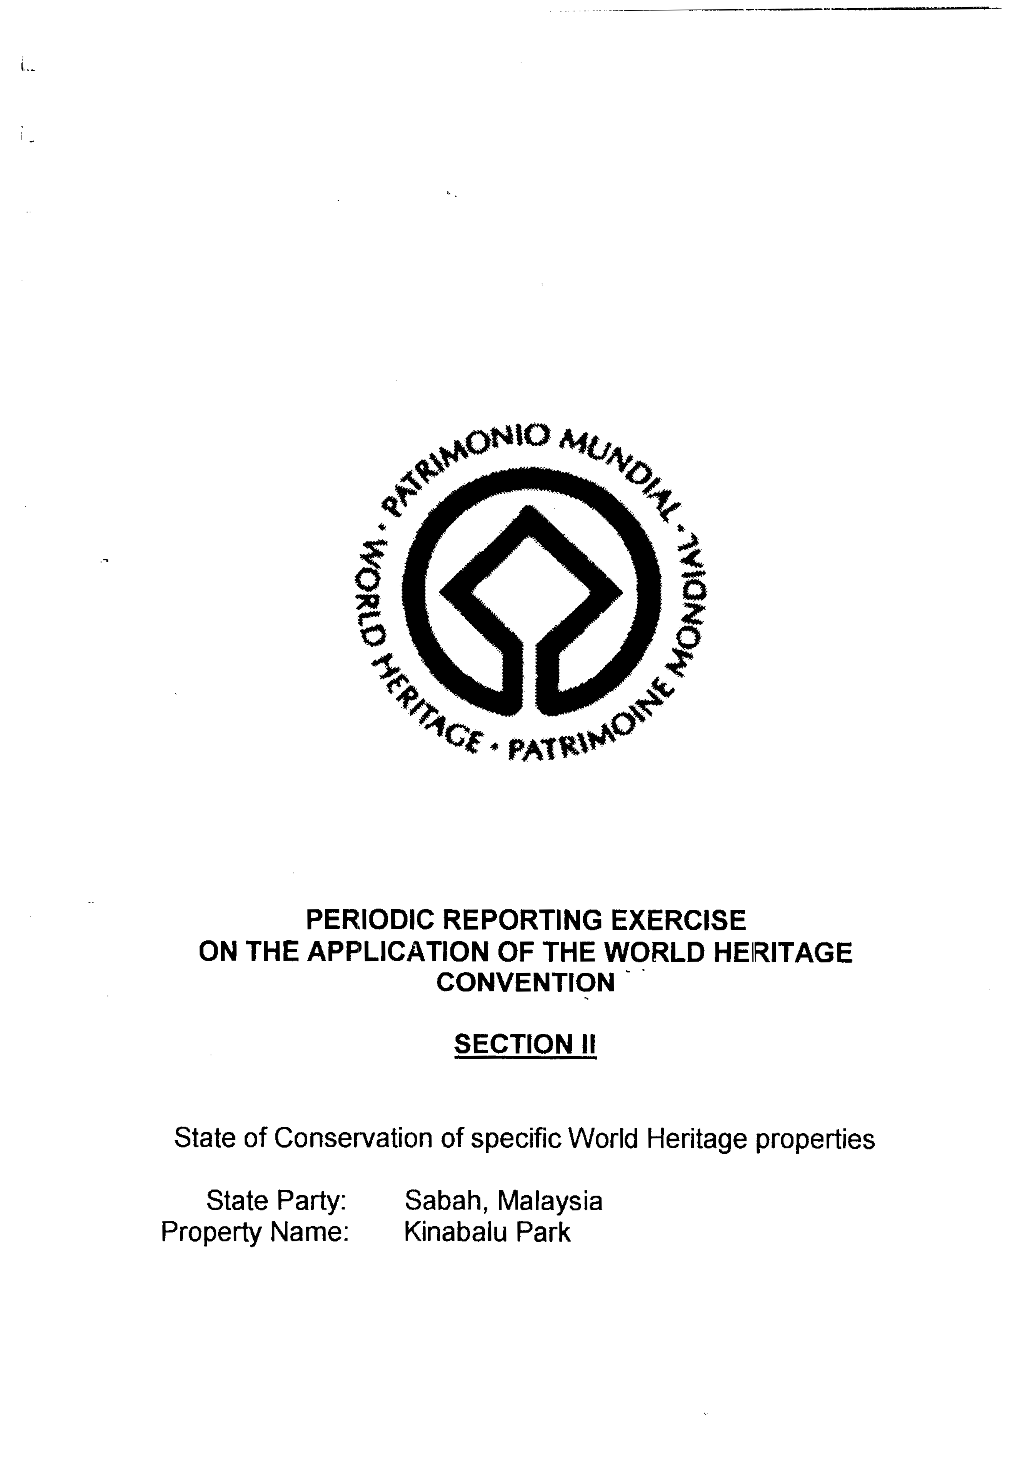 Section II: Periodic Report on the State of Conservation of Kinabalu Park